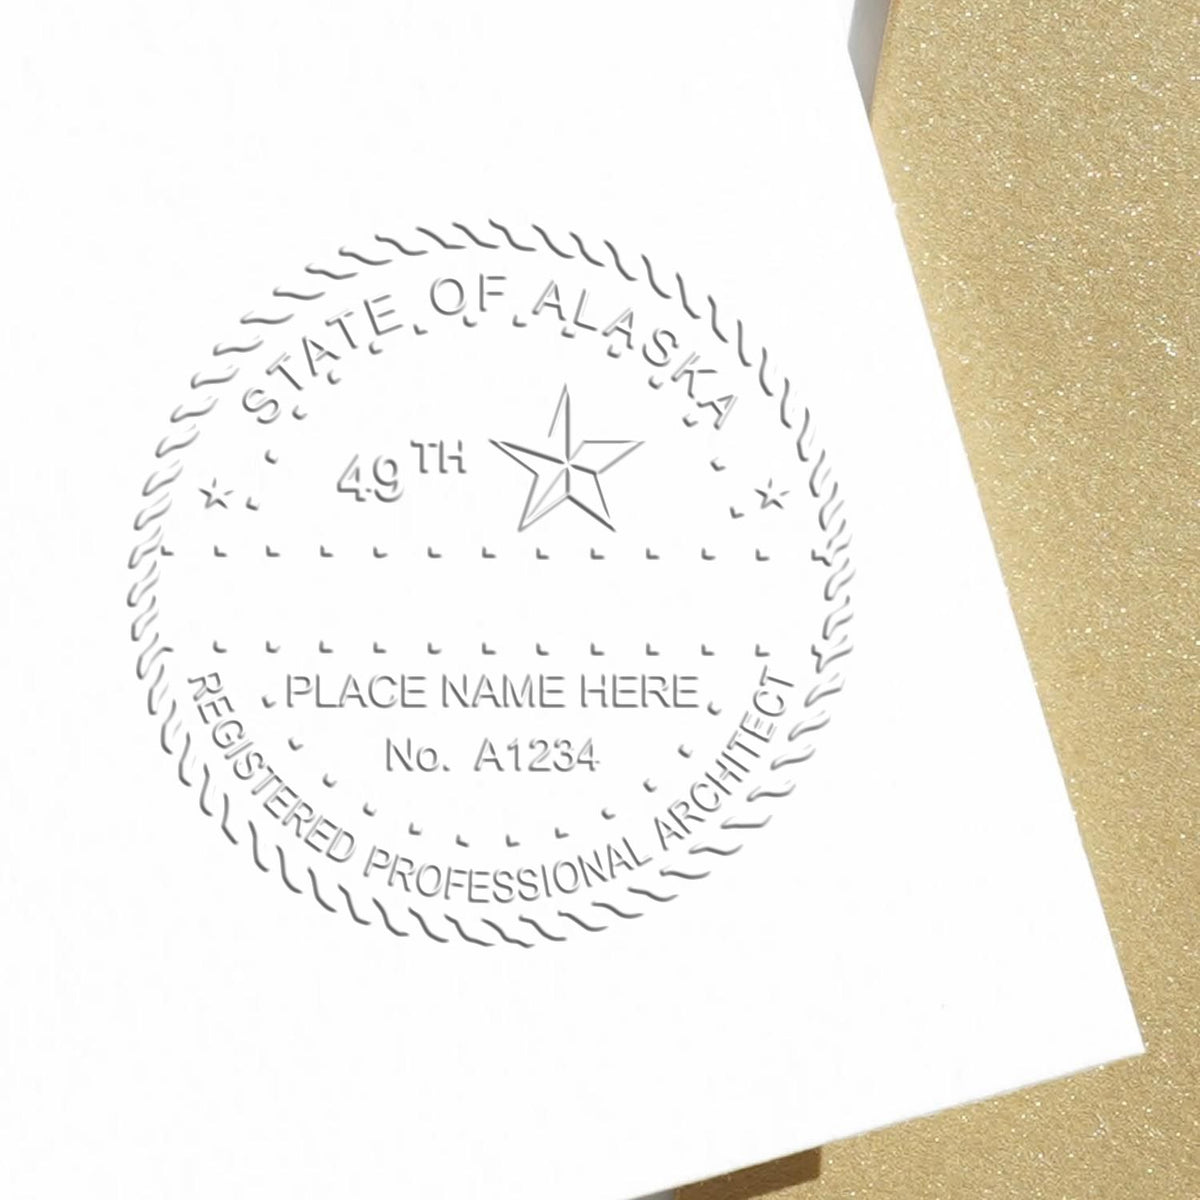 The State of Alaska Long Reach Architectural Embossing Seal stamp impression comes to life with a crisp, detailed photo on paper - showcasing true professional quality.